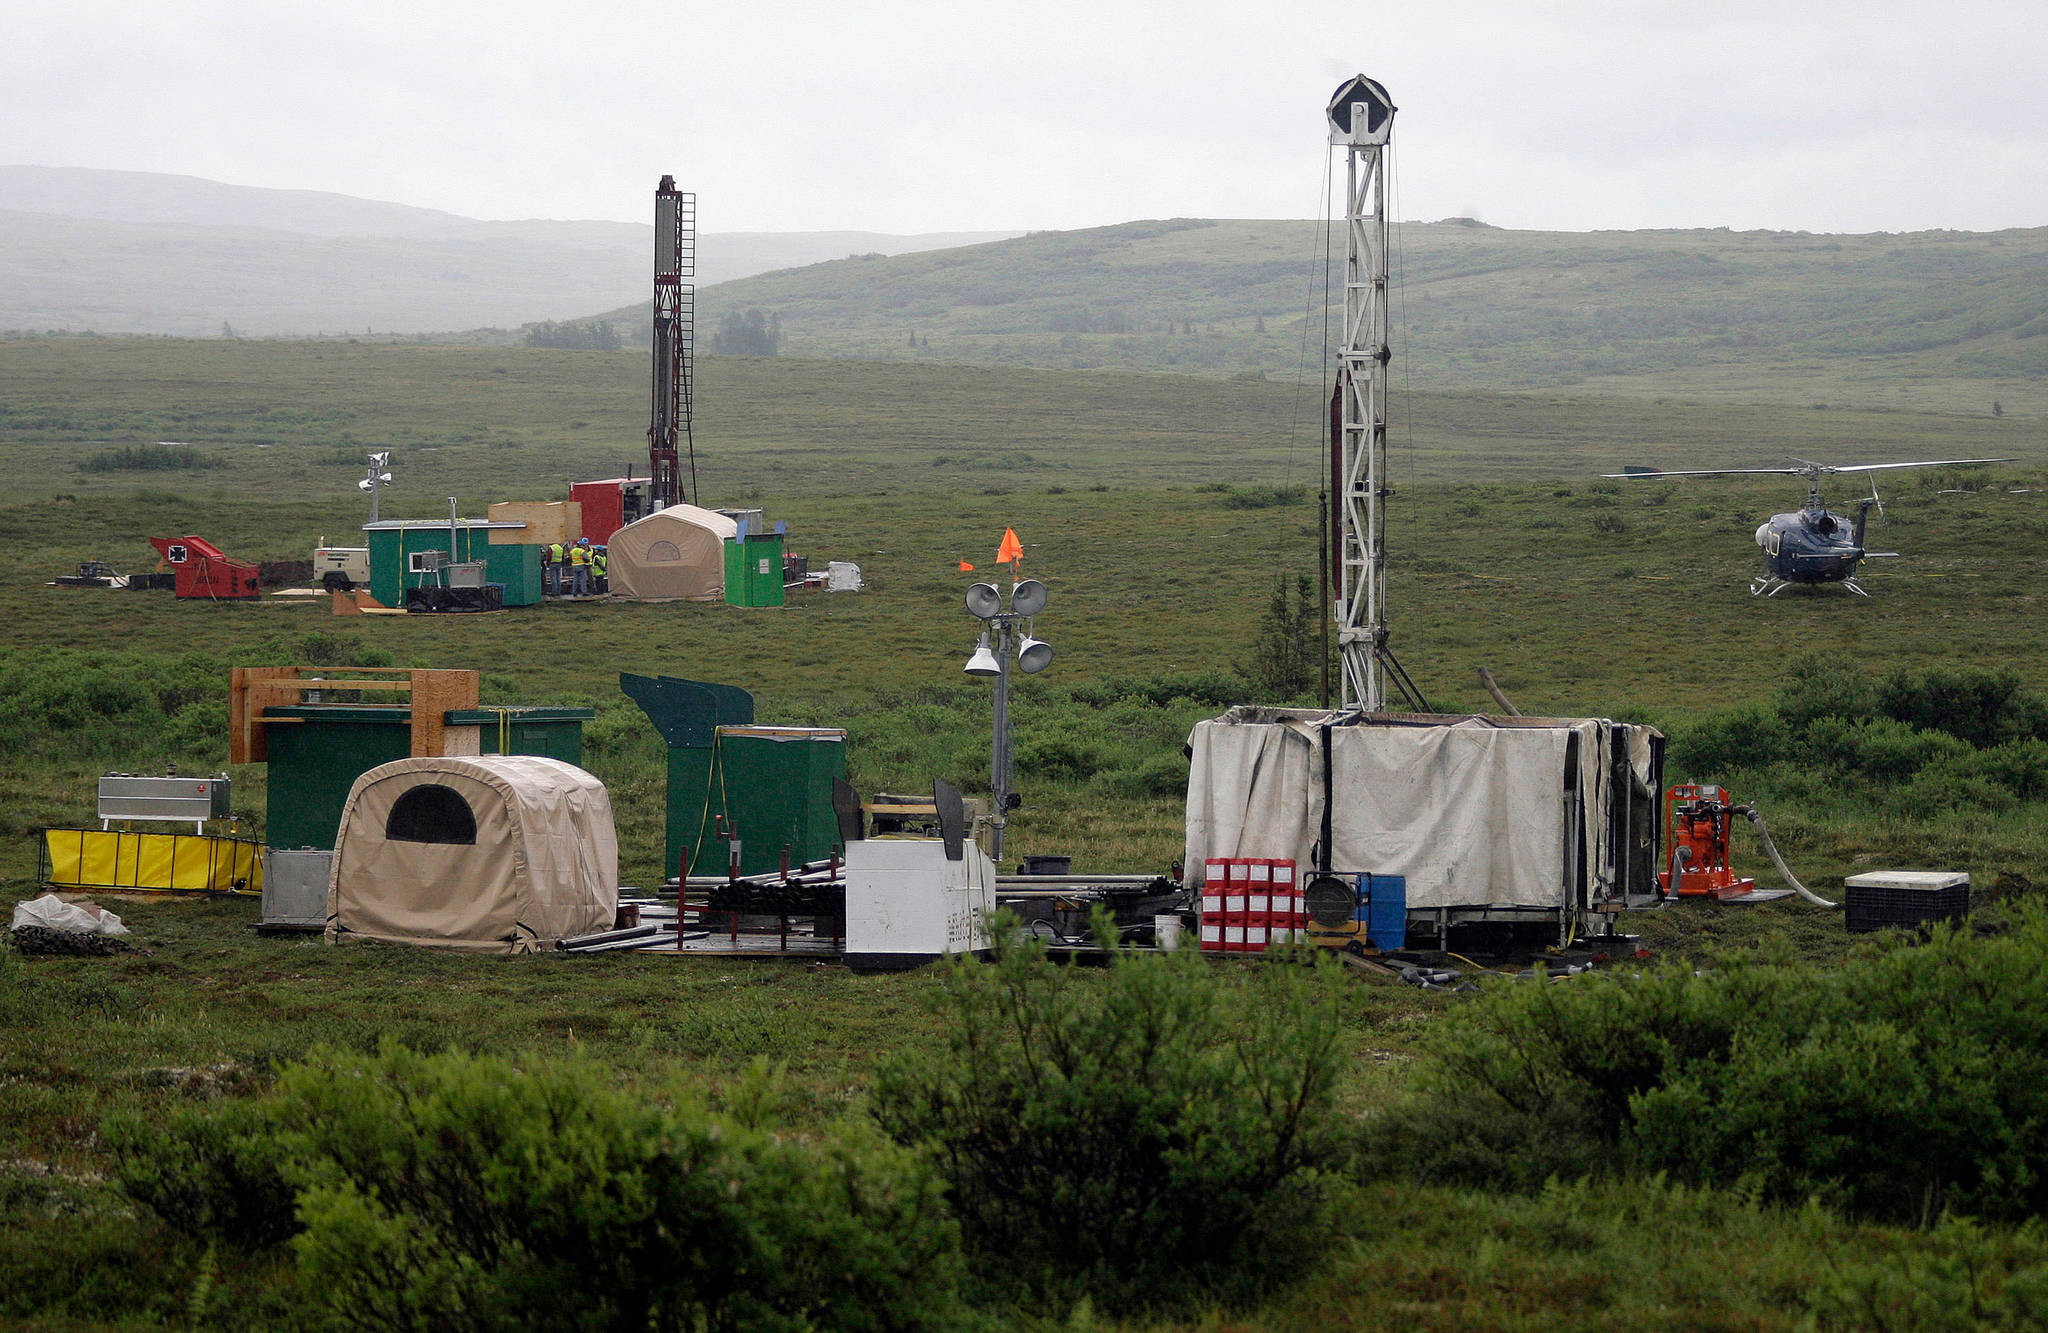 In this July 2007 photo, workers with the Pebble Mine project test drill in the Bristol Bay region of Alaska, near the village of Iliamma. The Pebble Limited Partnership, which wants to build a copper and gold mine near the headwaters of a major U.S. salmon fishery in southwest Alaska, says it plans to offer residents in the region a dividend. (AP Photo | Al Grillo, File)